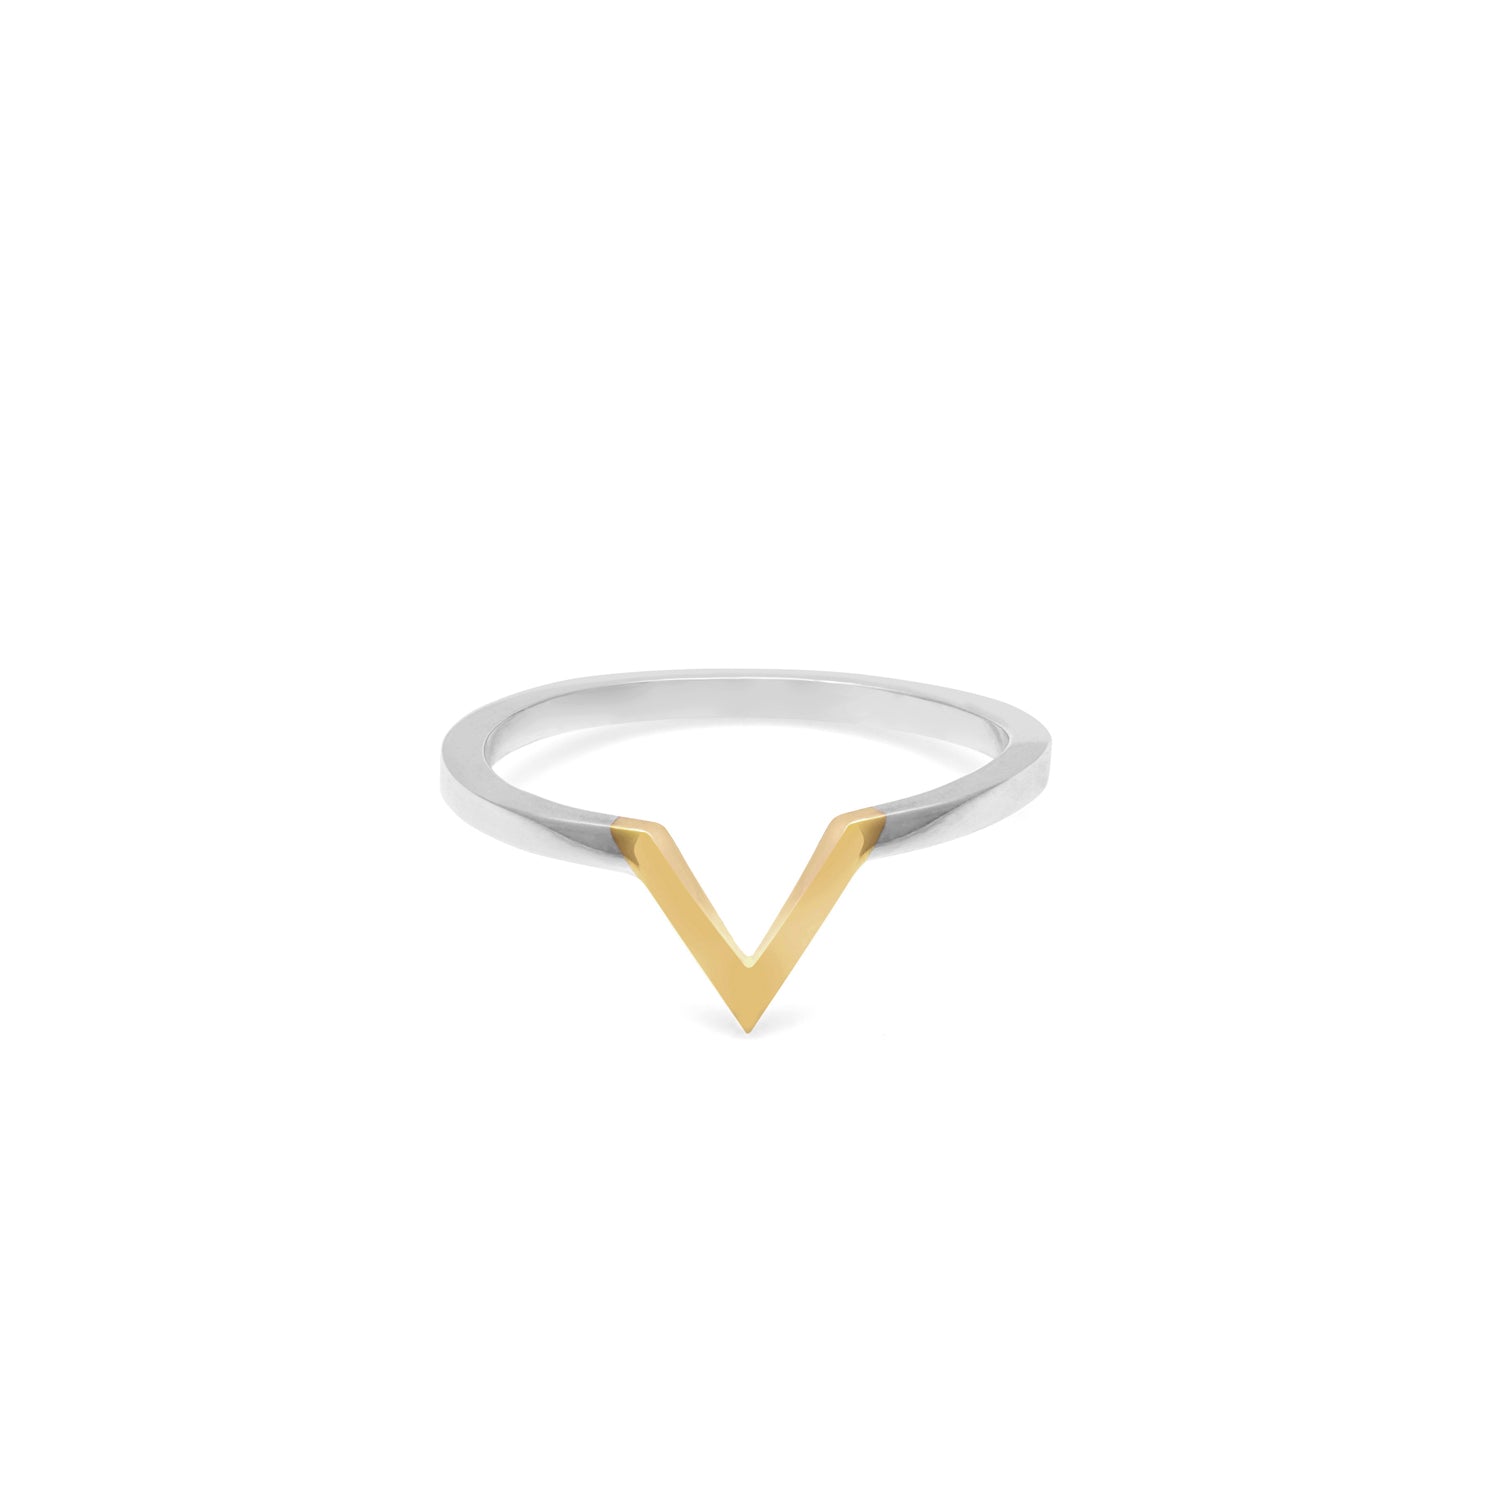 Two-tone Triangle Ring - 9k Yellow Gold & Silver - Myia Bonner Jewellery